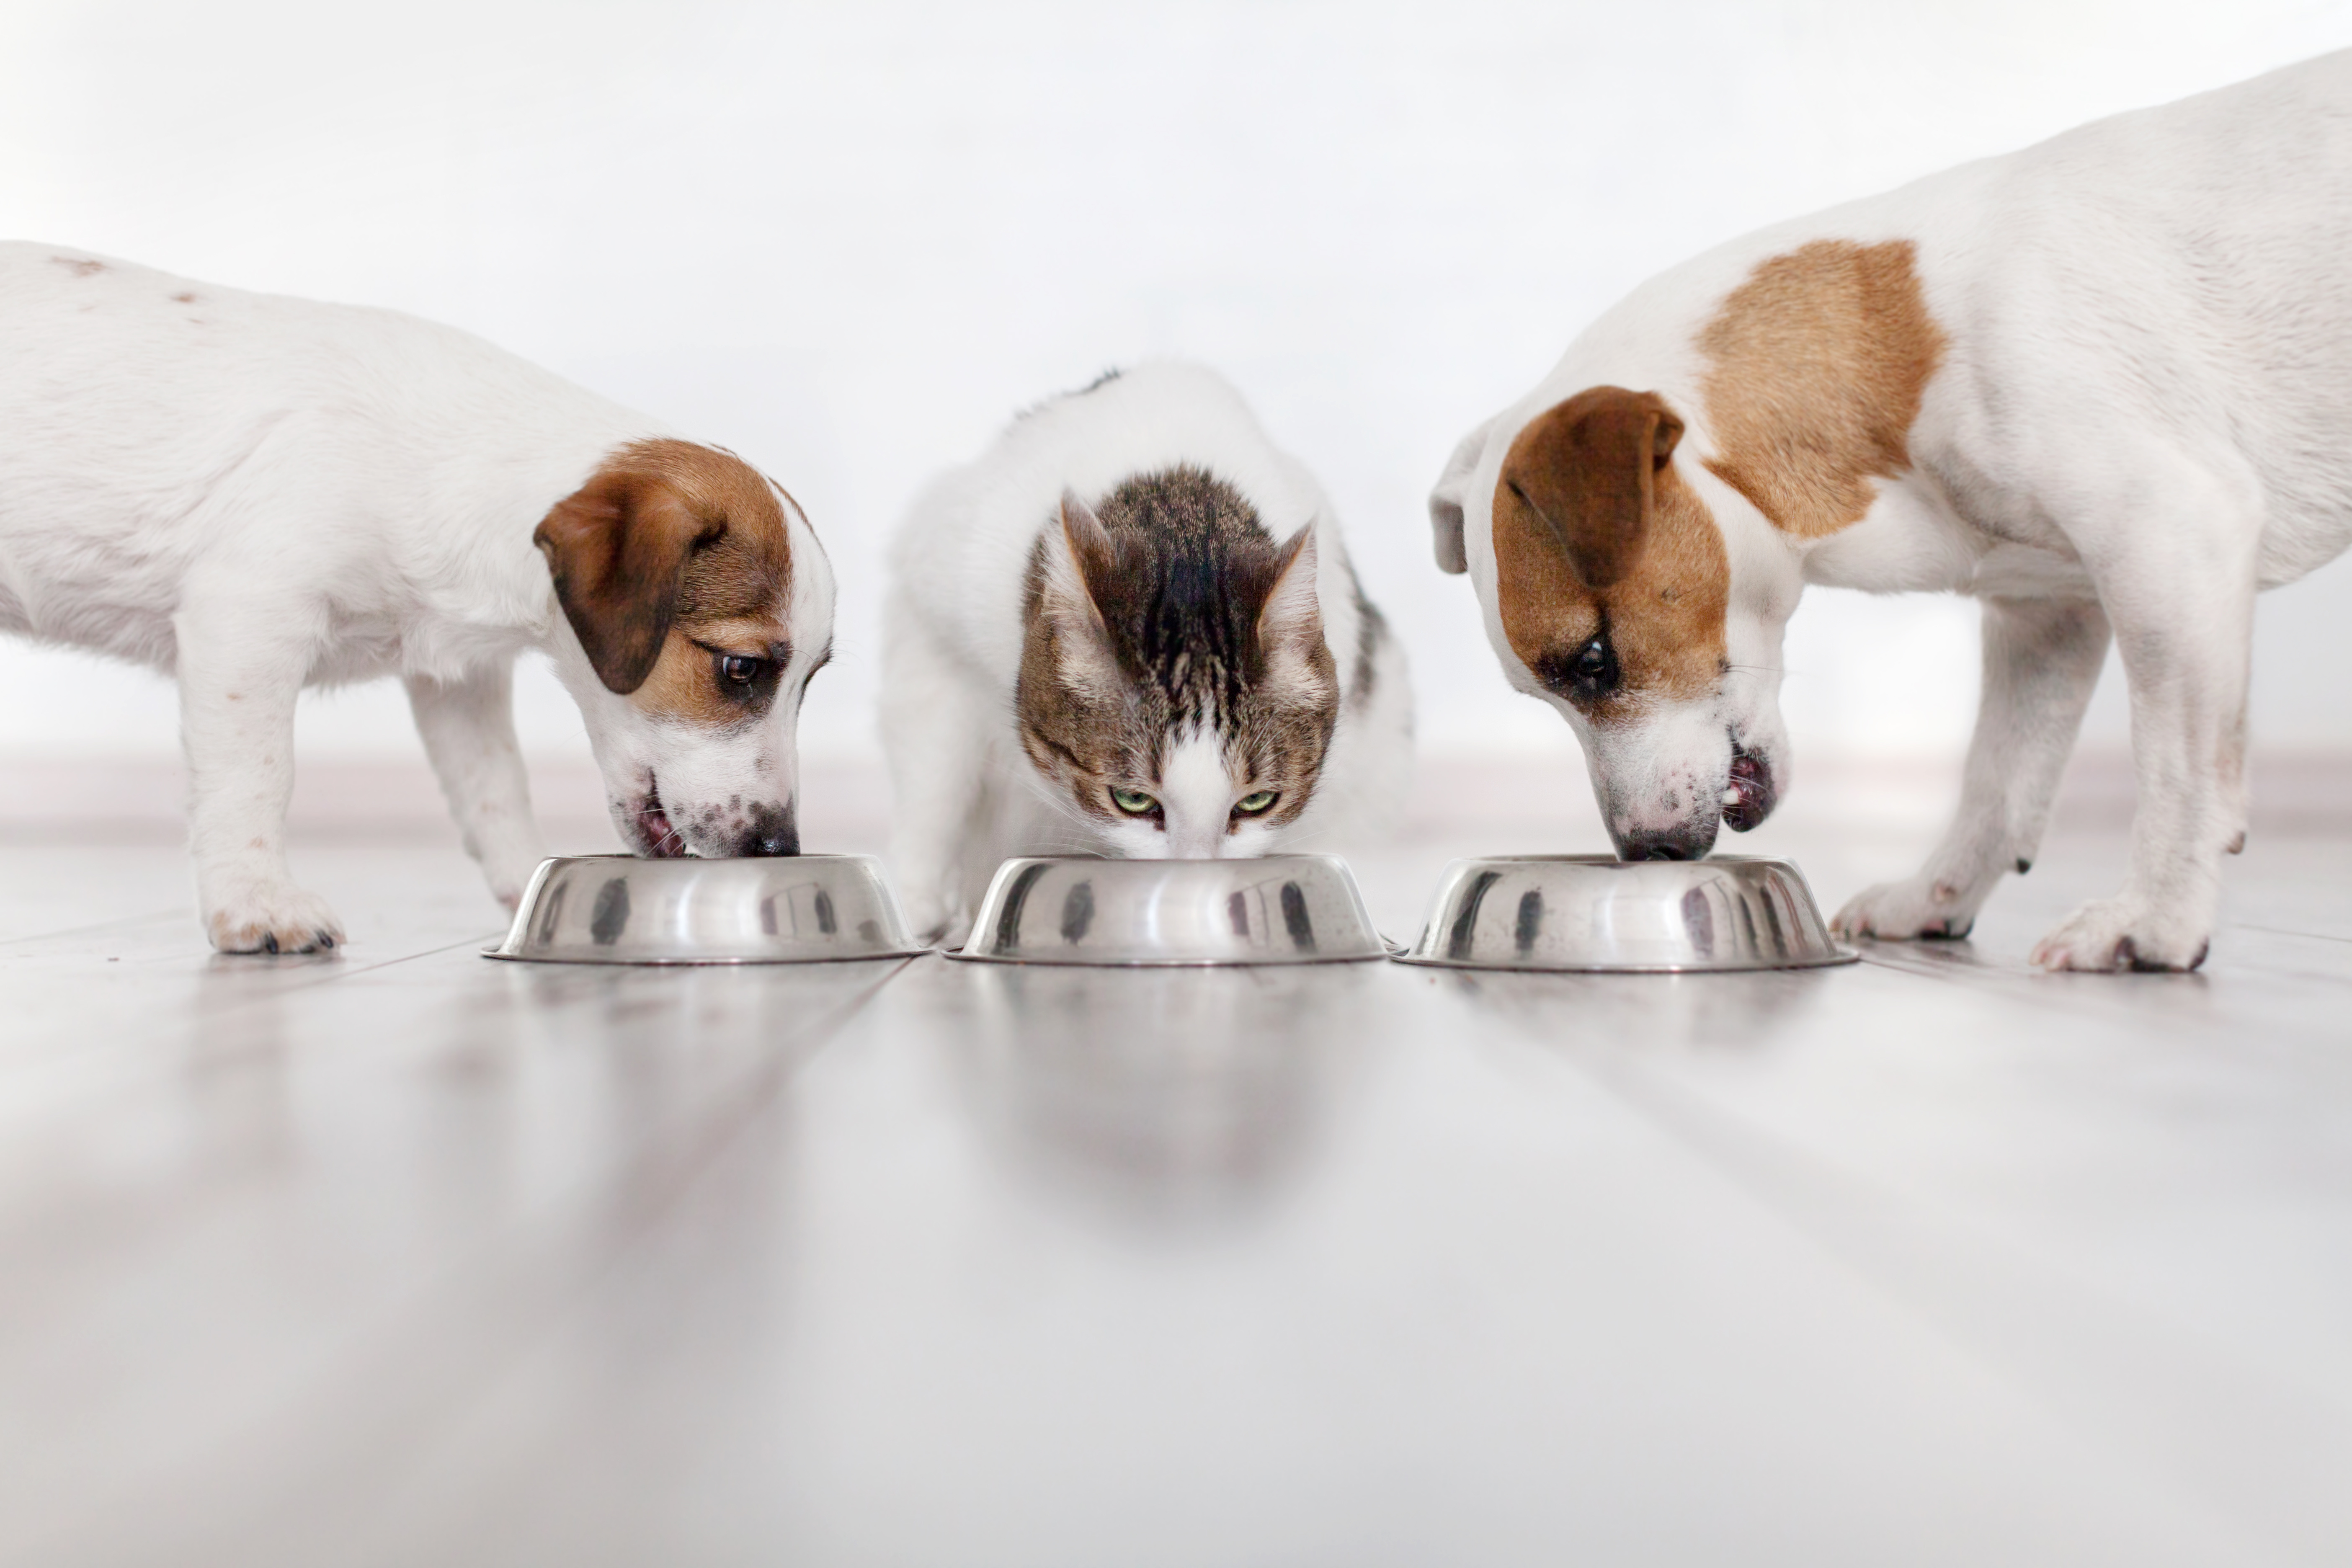 A cat, a dog and a puppy eat food from their bowl next to each other.